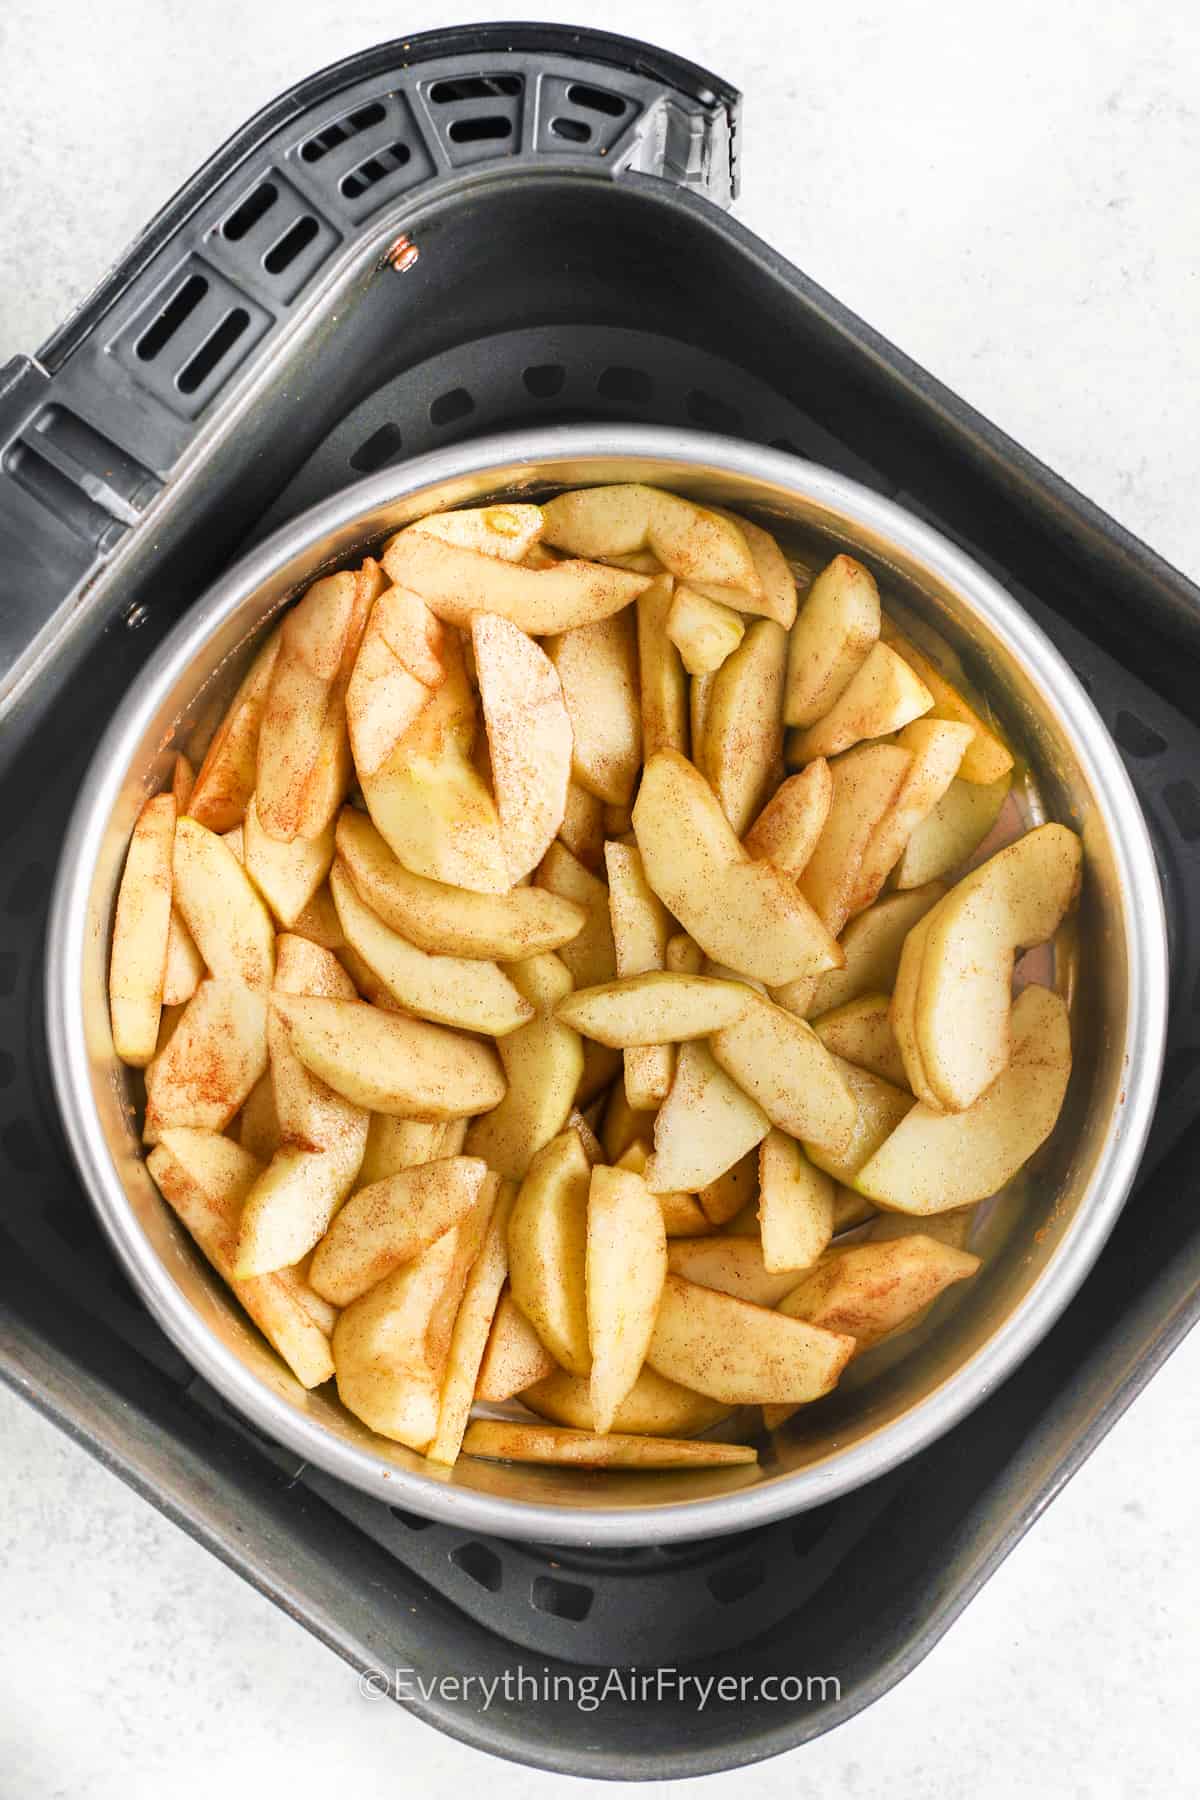 apples prepped in a baking dish in an air fryer basket to make apple crisp